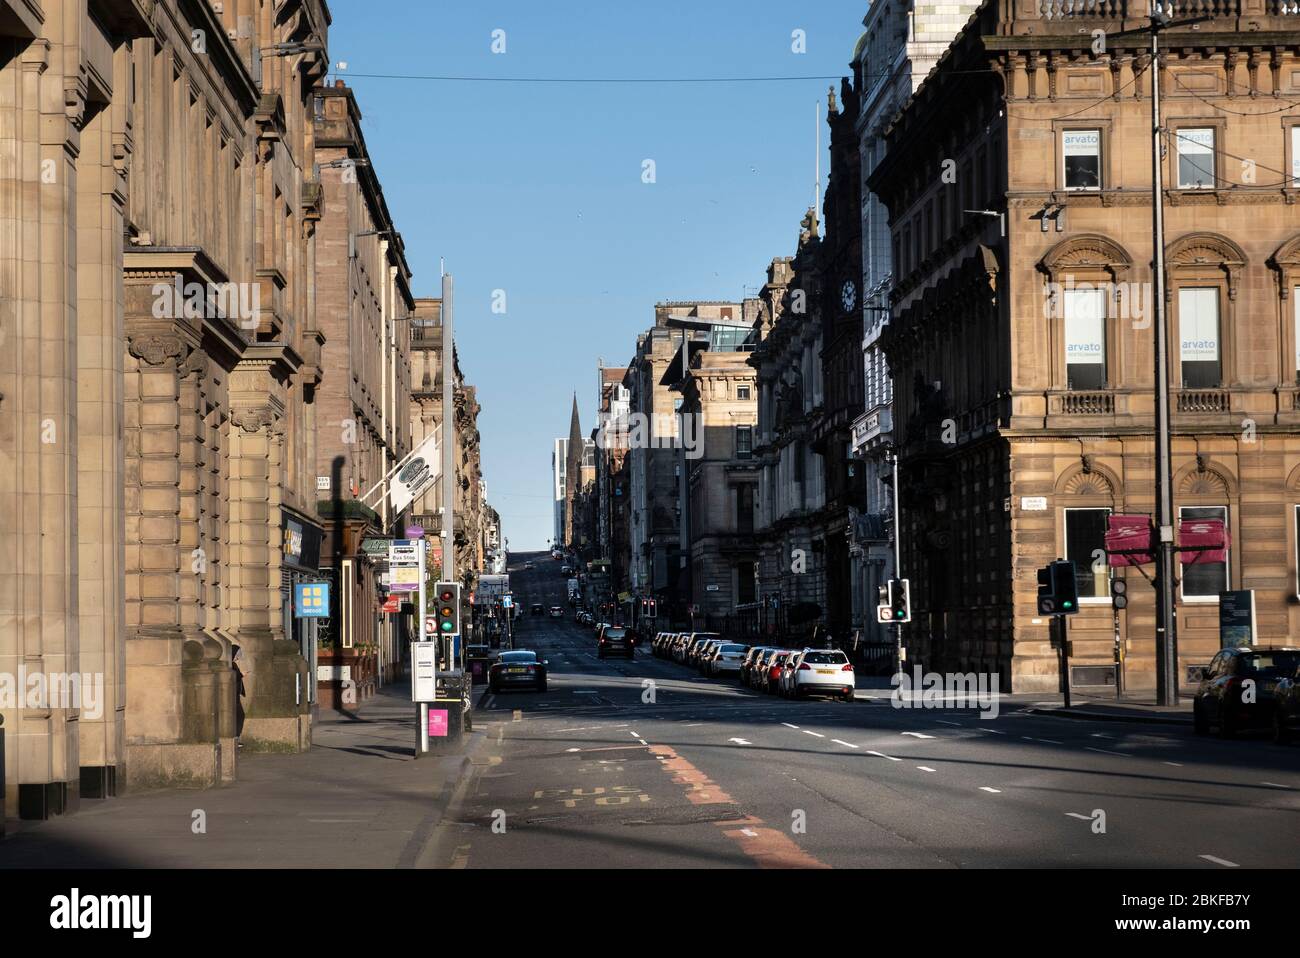 George square in Glasgow during the Covid-19 lockdown. Stock Photo